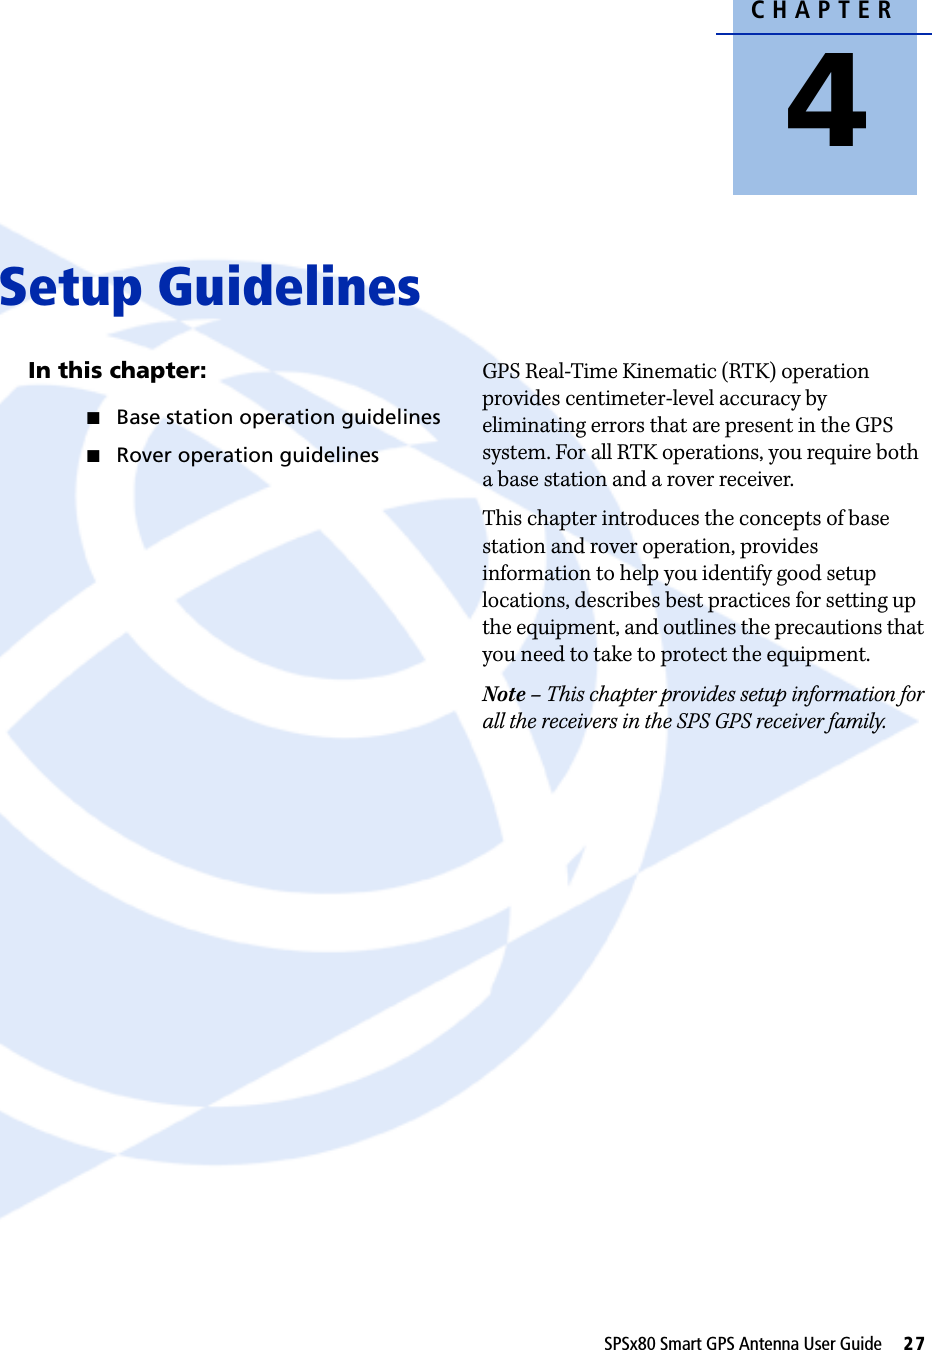 CHAPTER4SPSx80 Smart GPS Antenna User Guide     27Setup Guidelines 4In this chapter:QBase station operation guidelinesQRover operation guidelinesGPS Real-Time Kinematic (RTK) operation provides centimeter-level accuracy by eliminating errors that are present in the GPS system. For all RTK operations, you require both a base station and a rover receiver.This chapter introduces the concepts of base station and rover operation, provides information to help you identify good setup locations, describes best practices for setting up the equipment, and outlines the precautions that you need to take to protect the equipment.Note – This chapter provides setup information for all the receivers in the SPS GPS receiver family.